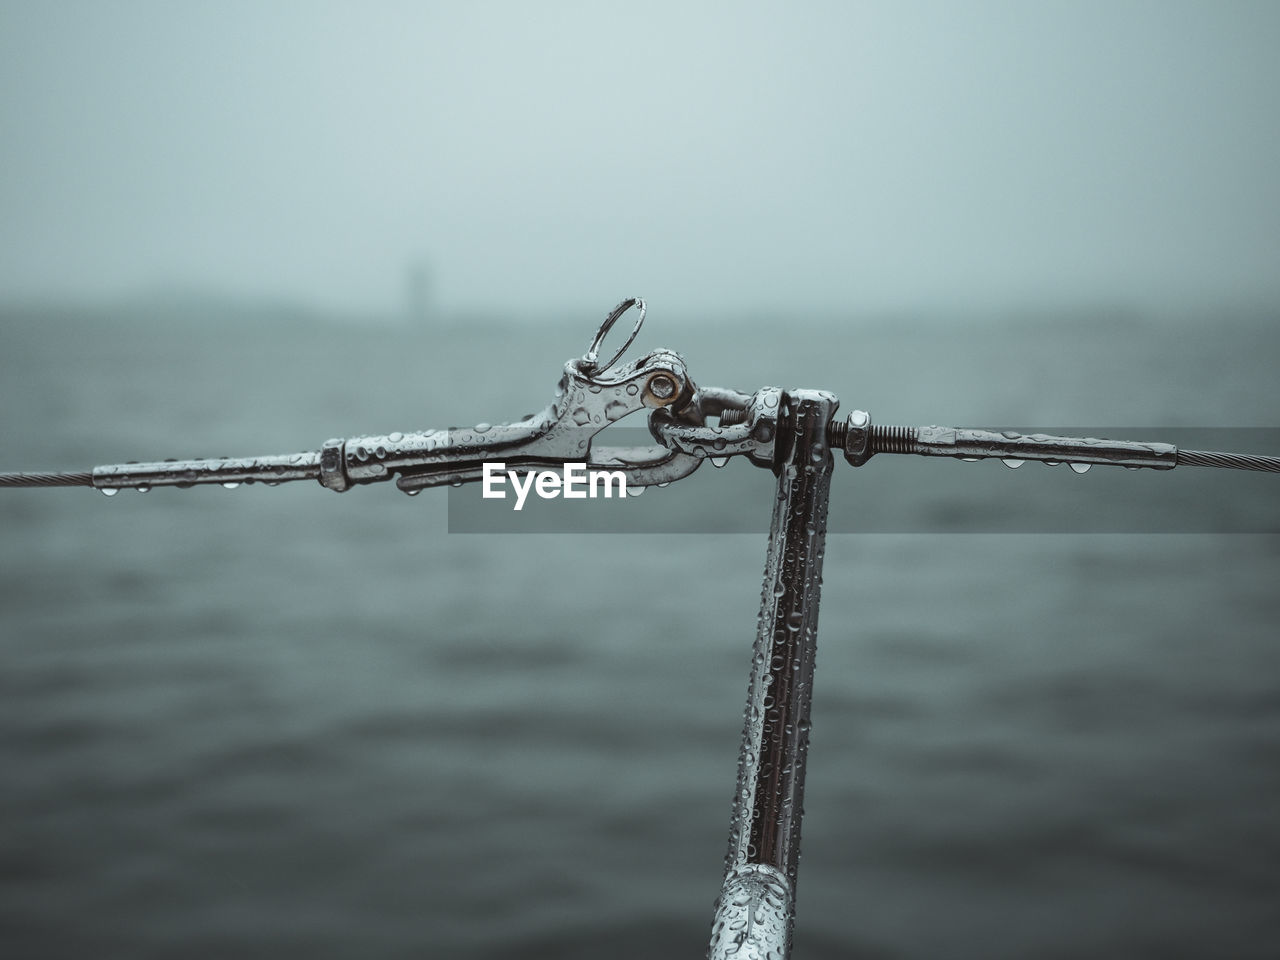 Closeup of a yacht mechanical structure in the rain.